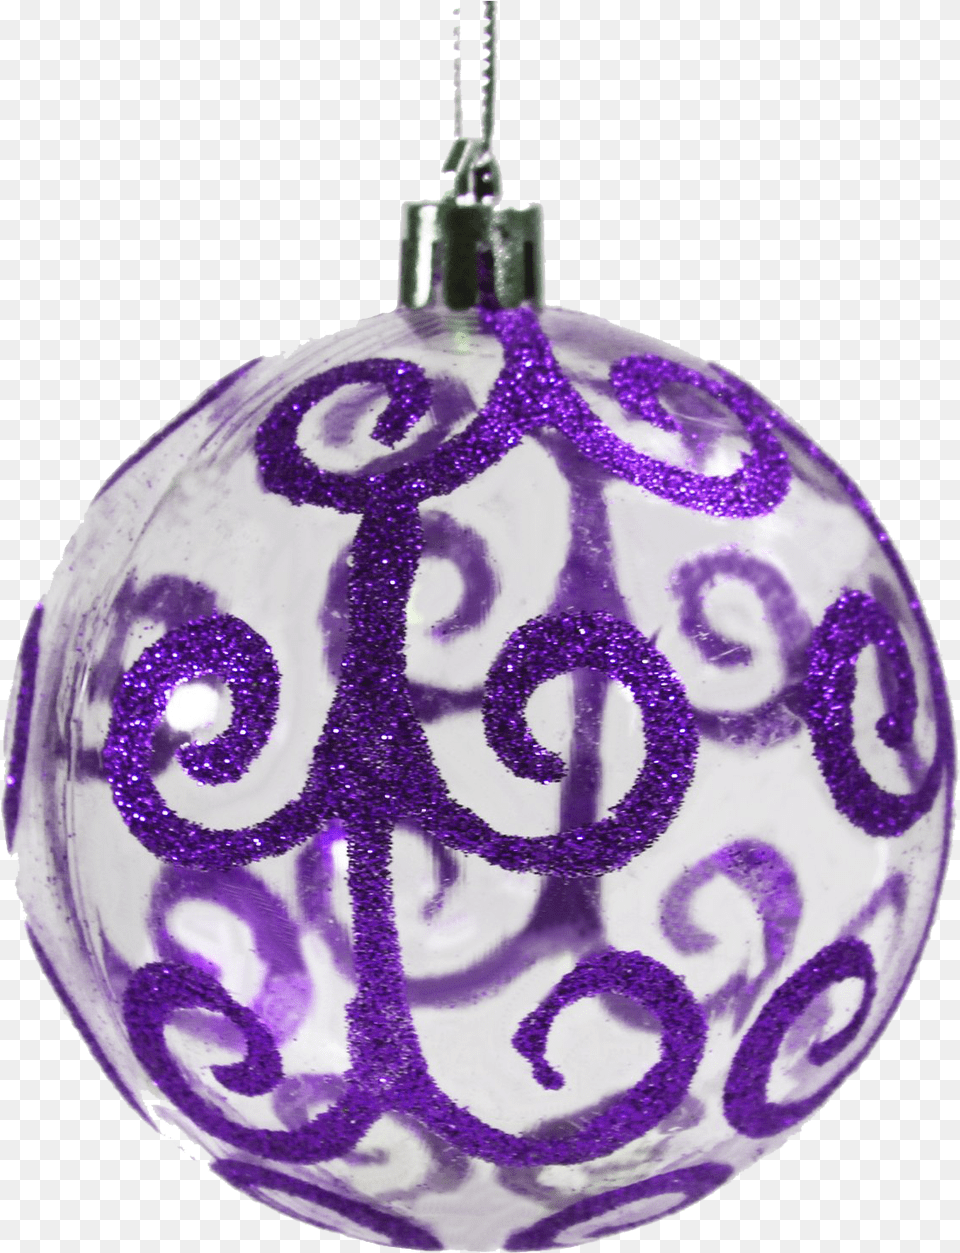 Purple Christmas Ball Background Sphere Christmas Ornaments, Accessories, Ornament Png